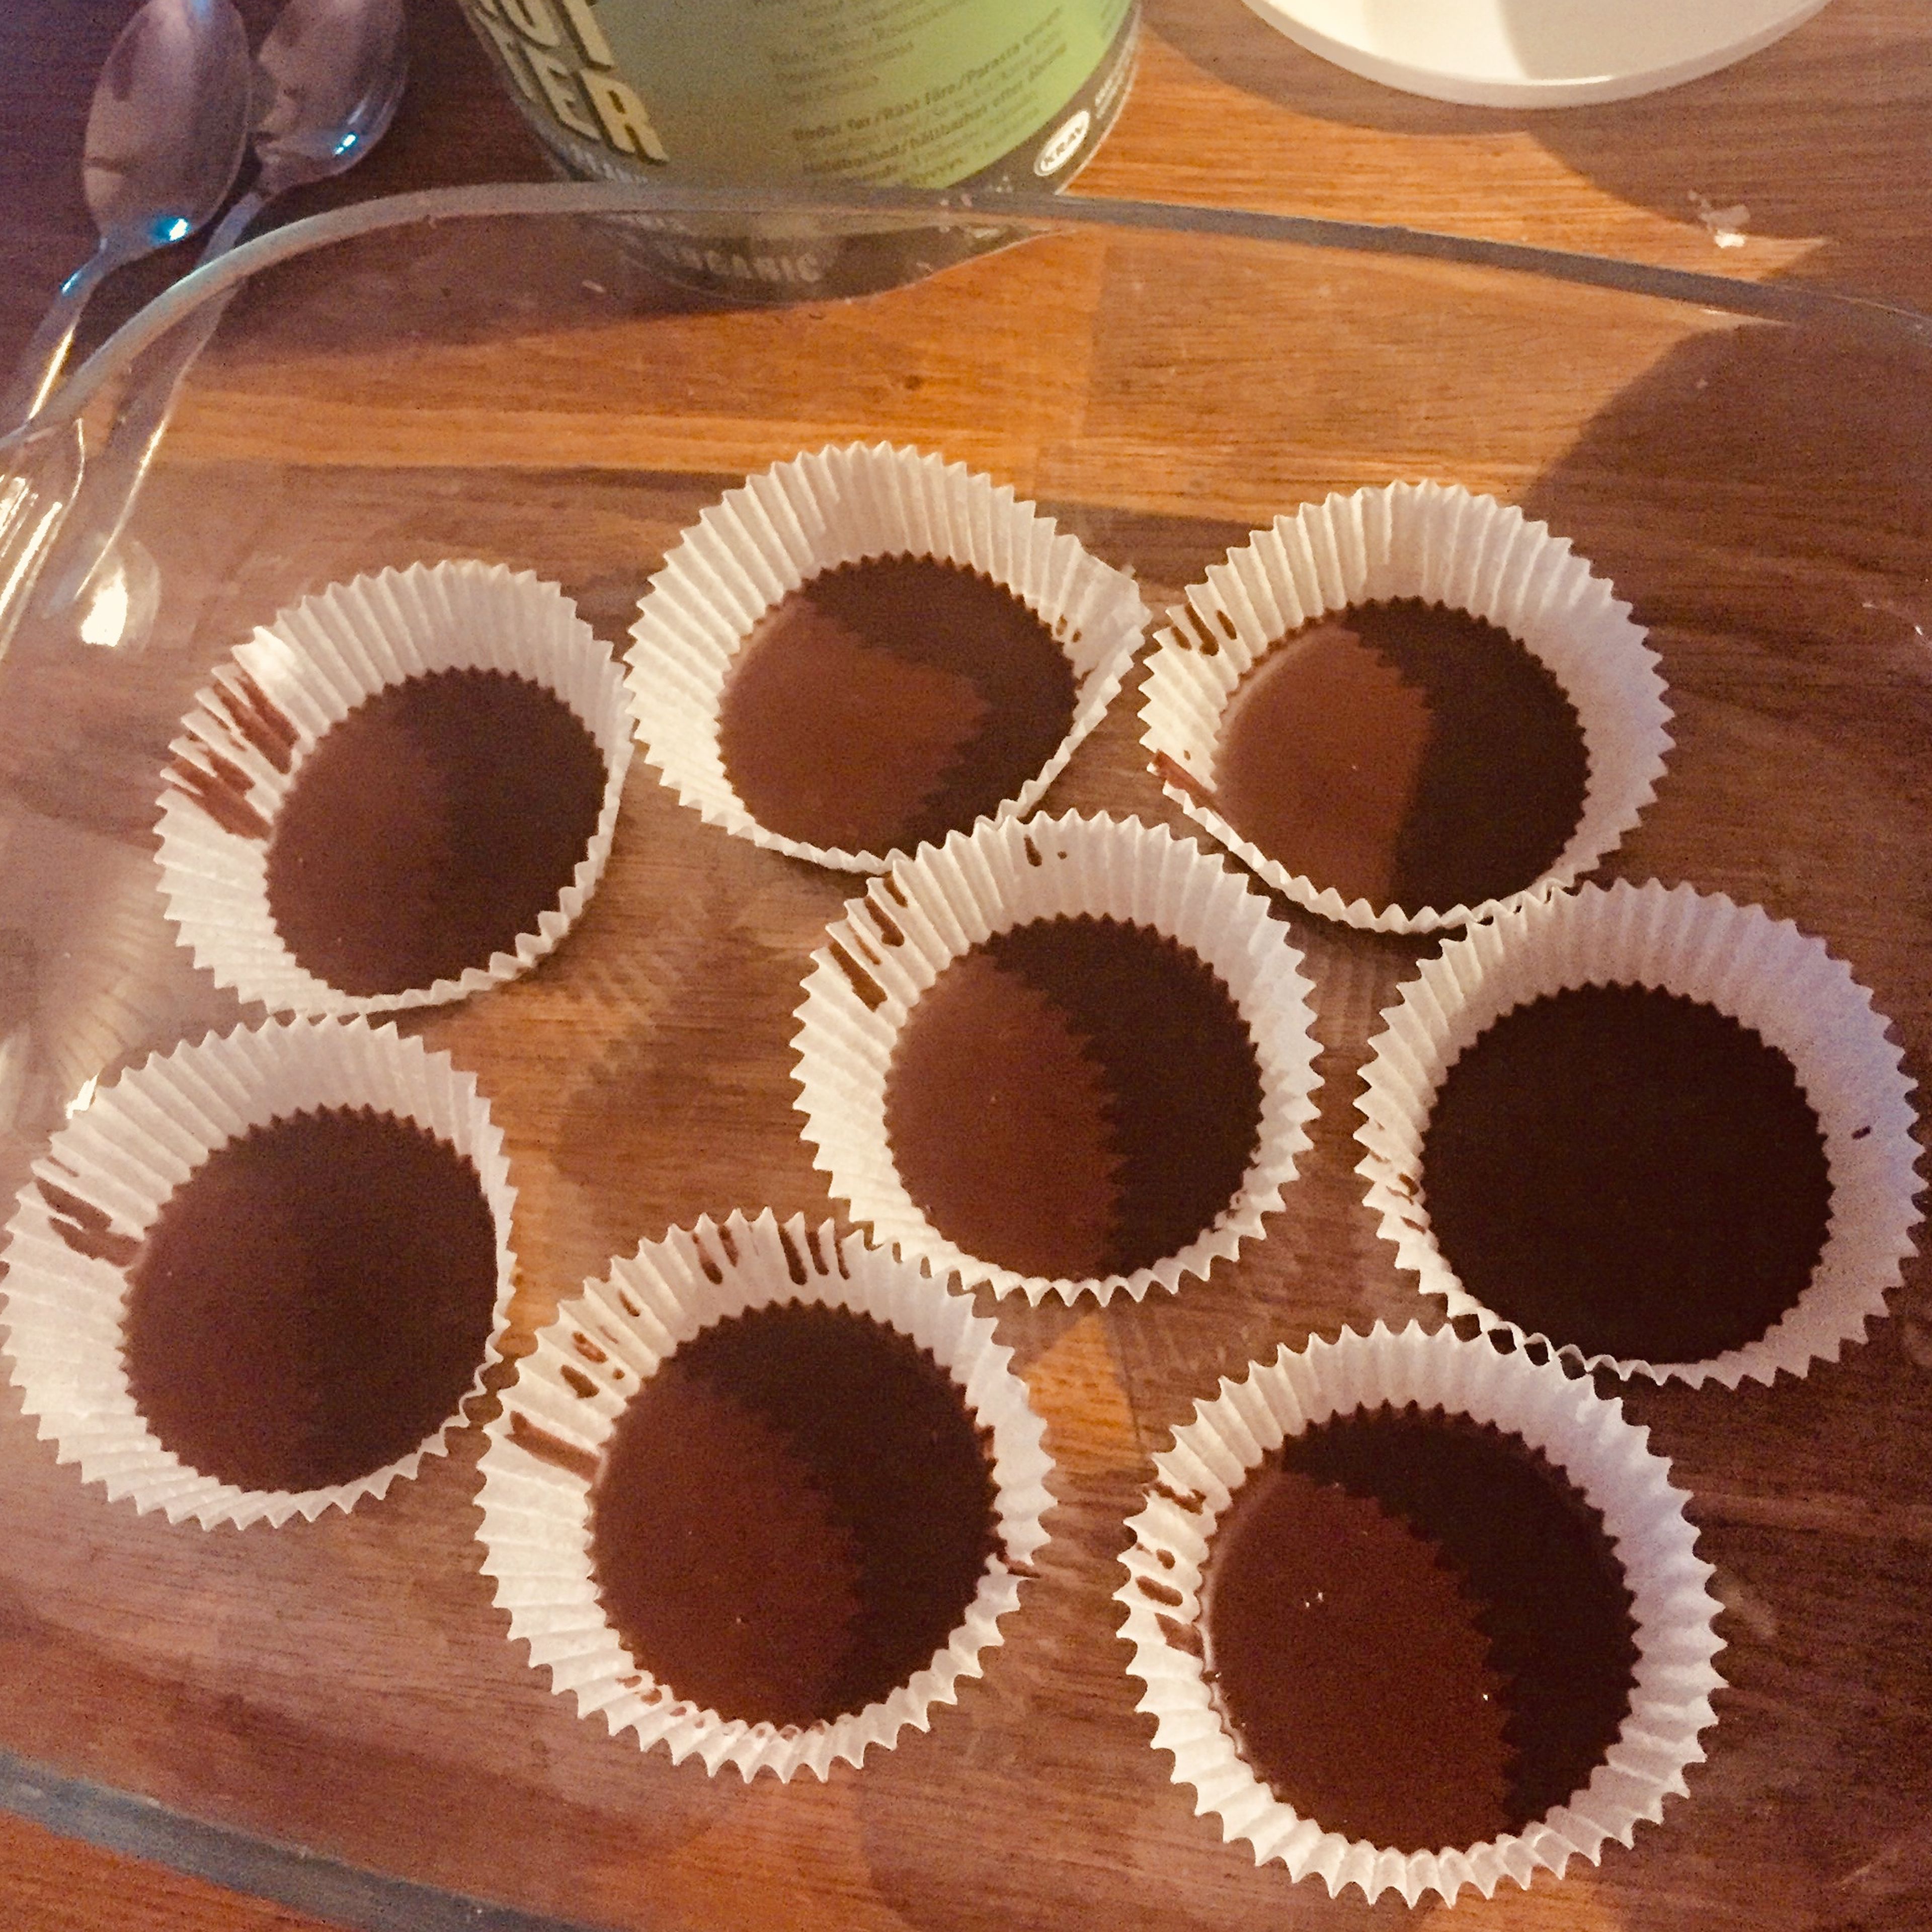 Add the first layer in the cups by filling them with a thin layer of melted chocolate. Then quick freeze them for around 5 min.